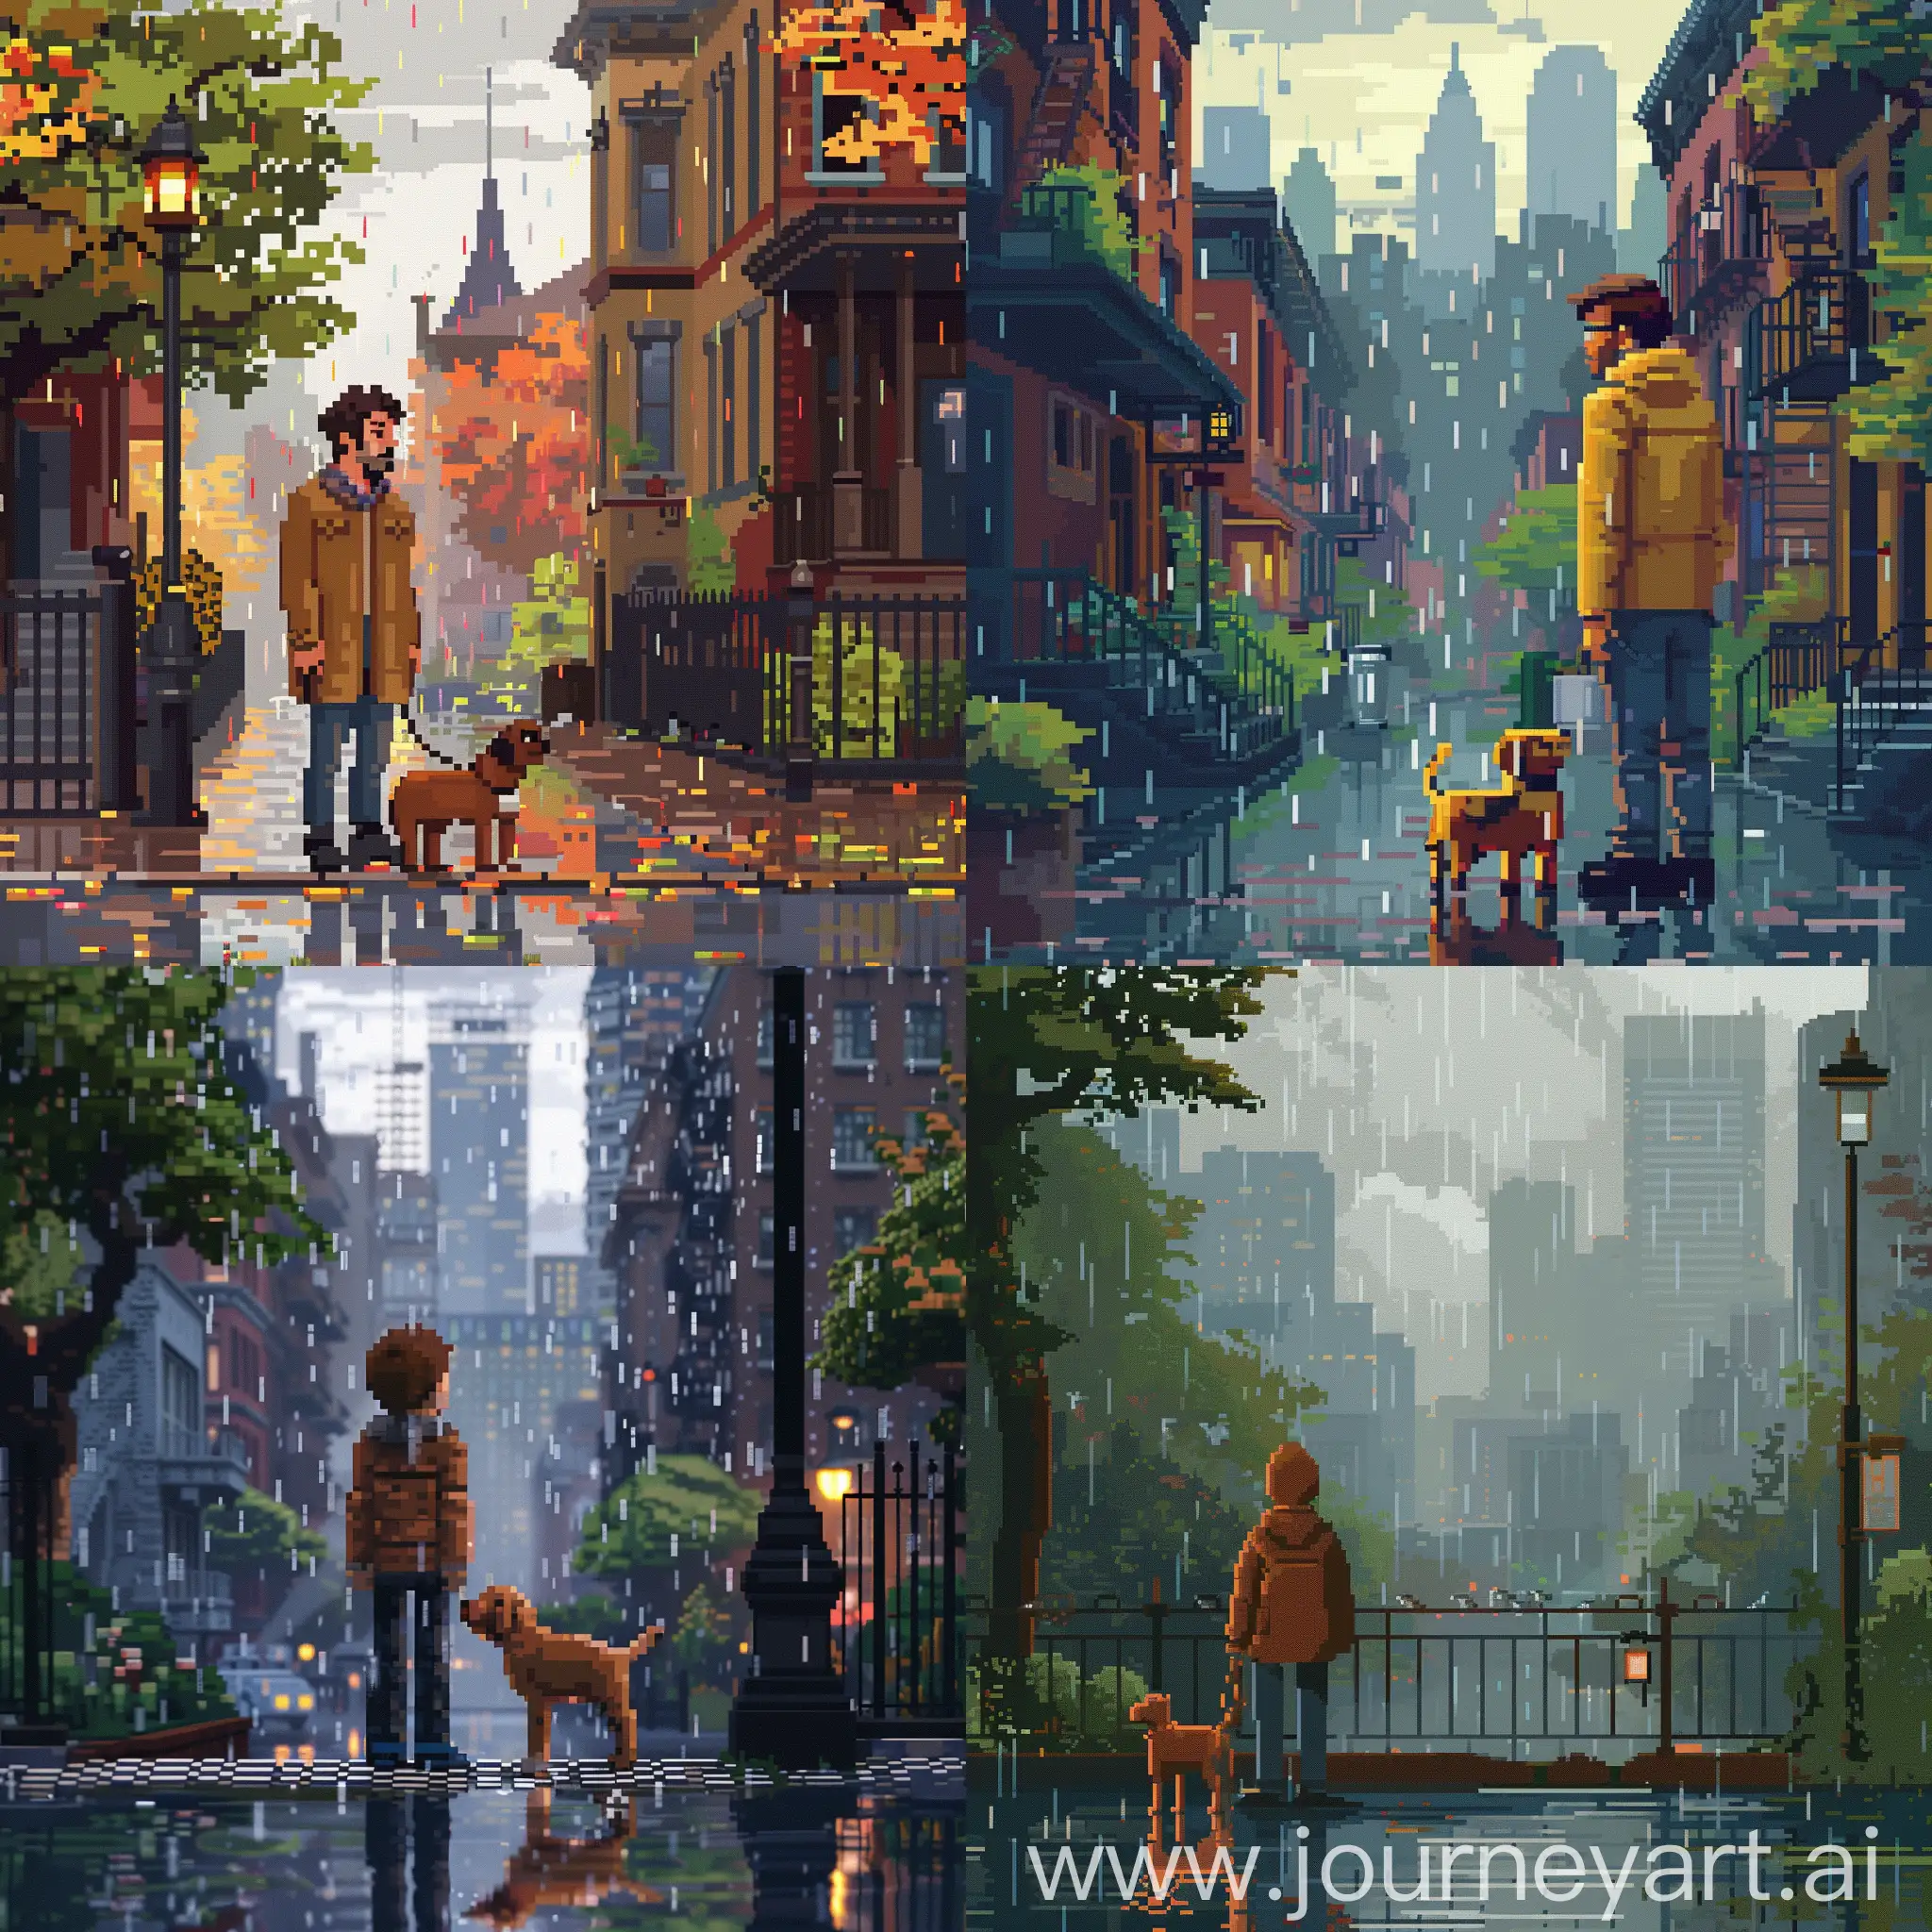 a pixel citizen with his dog in a rainy beautiful pixel city.